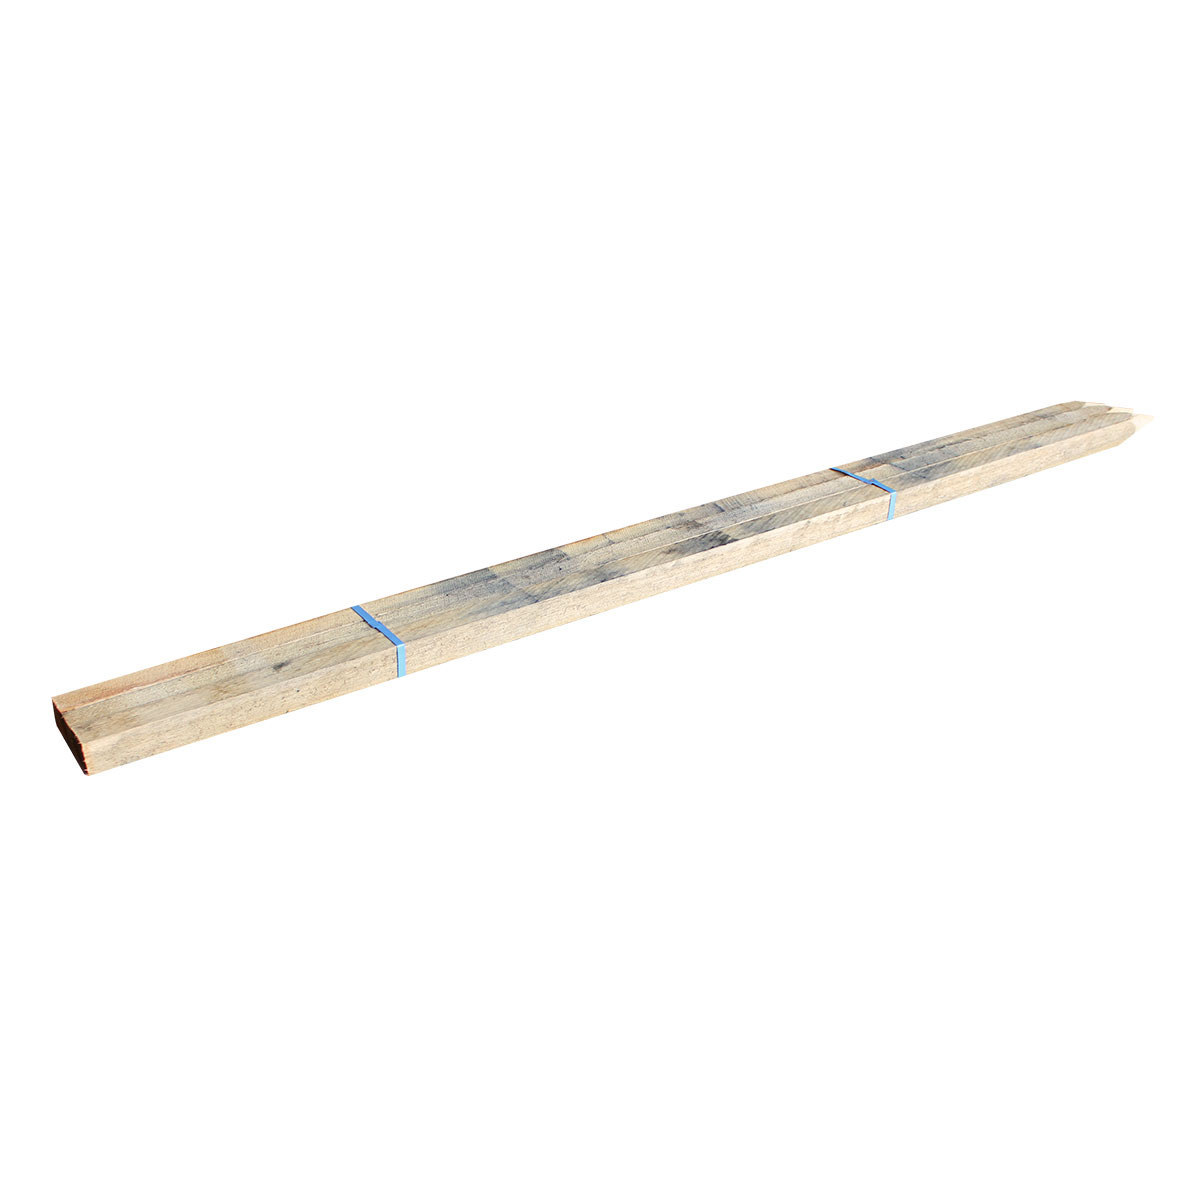 Hardwood Stakes 50 x 50 x 2100mm - 3 Pack